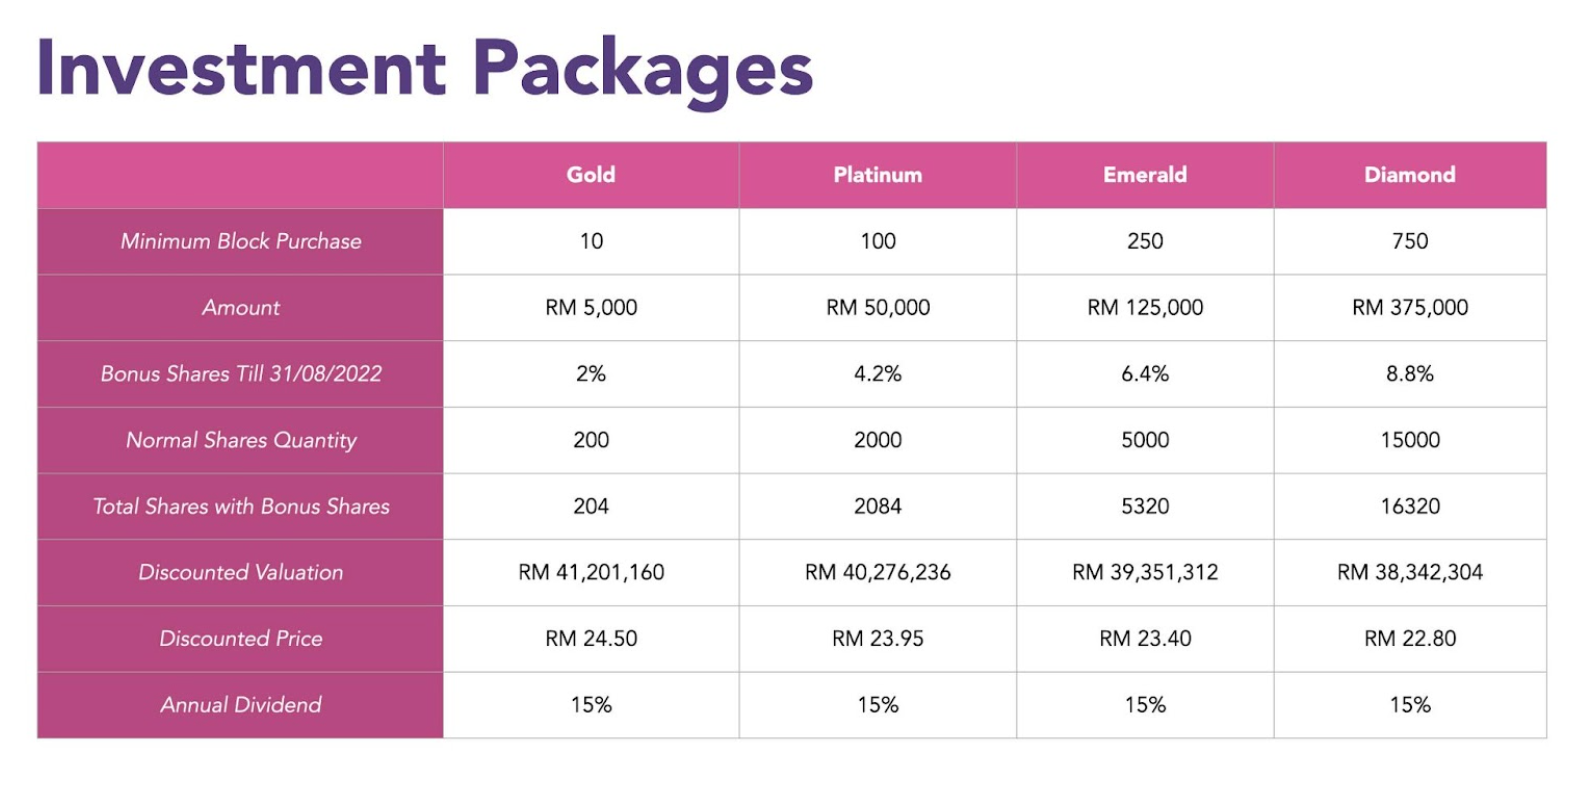 Investment packages